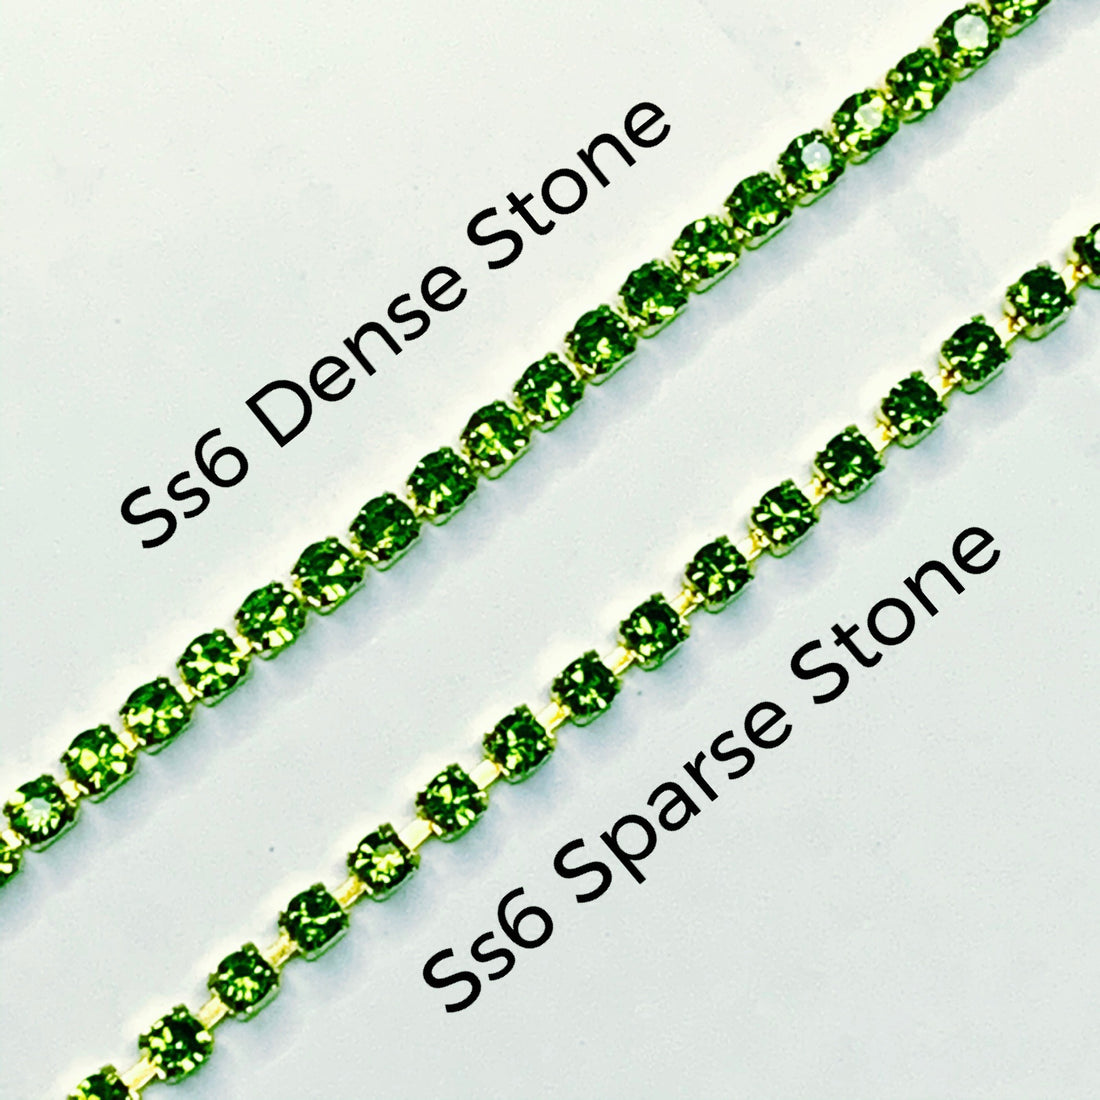 What is the difference between Sparse and Dense Rhinestone Chain?